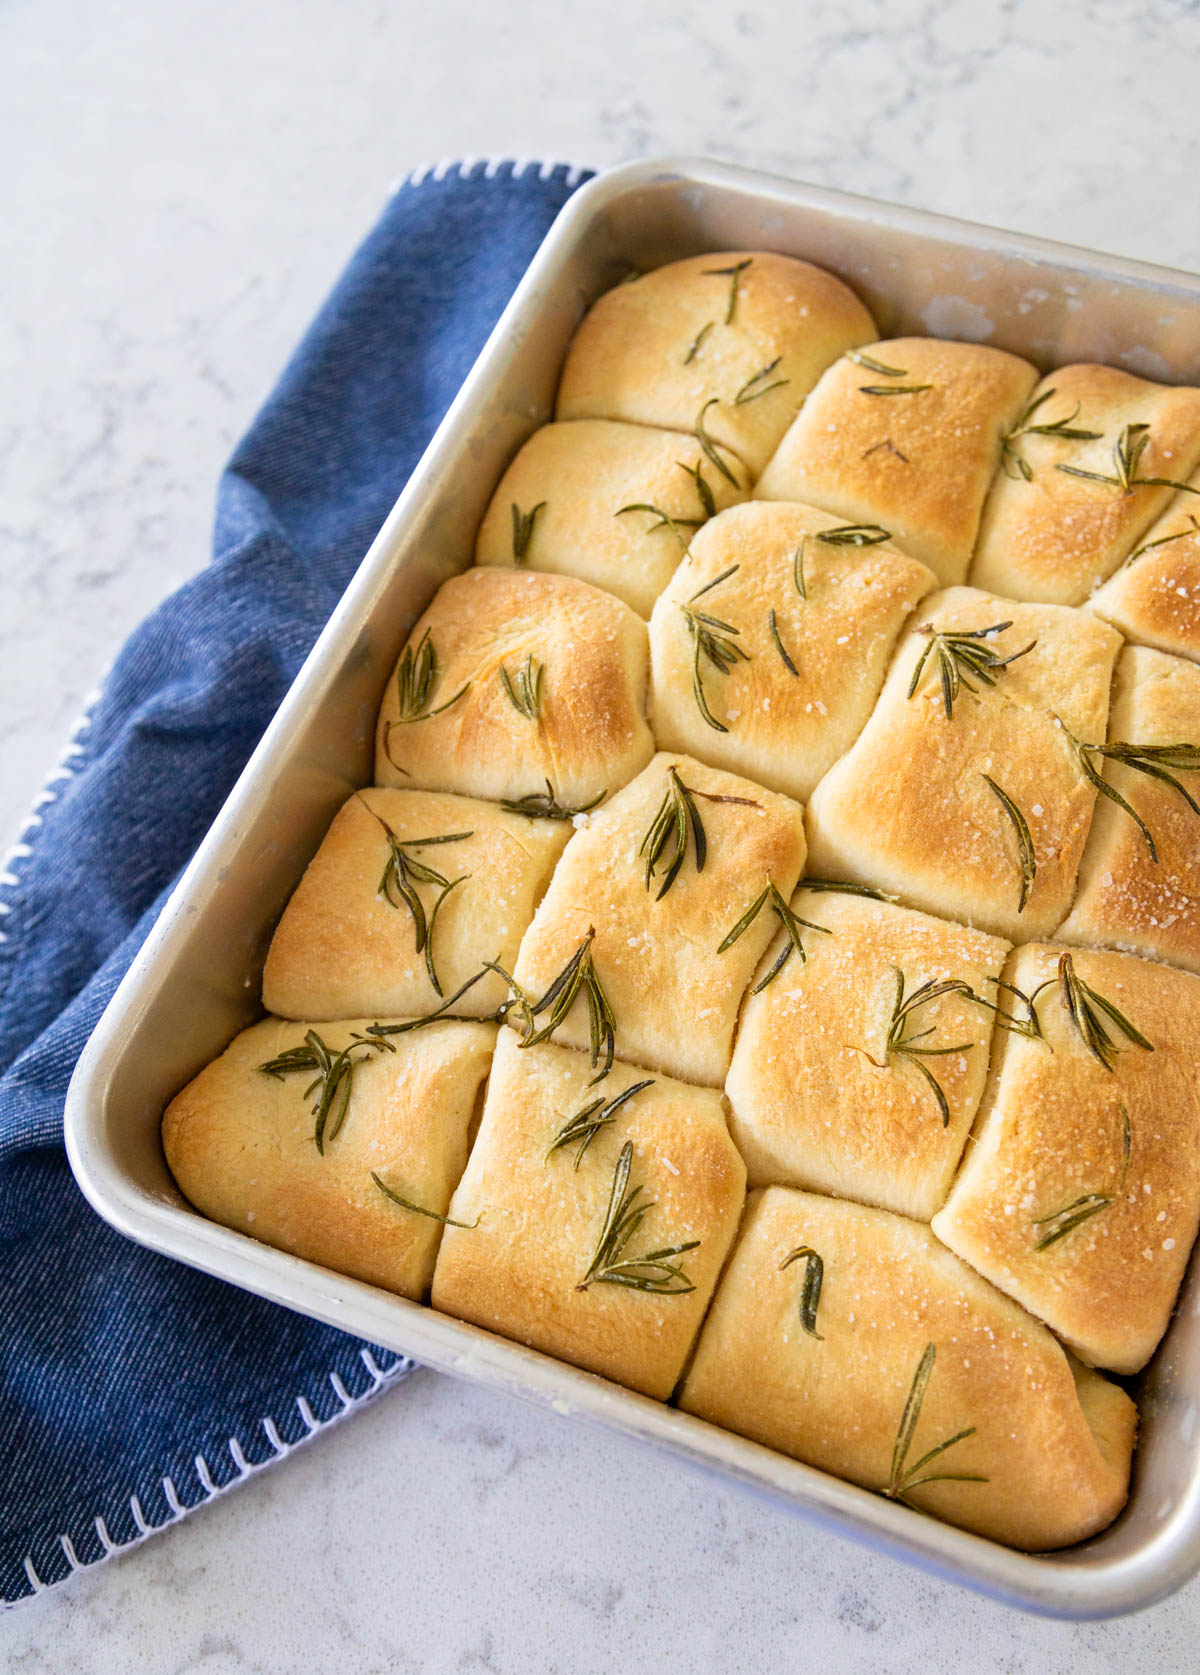 The dinner rolls have just come out of the oven and are a gorgeous golden brown with roasted rosemary leaves on top.